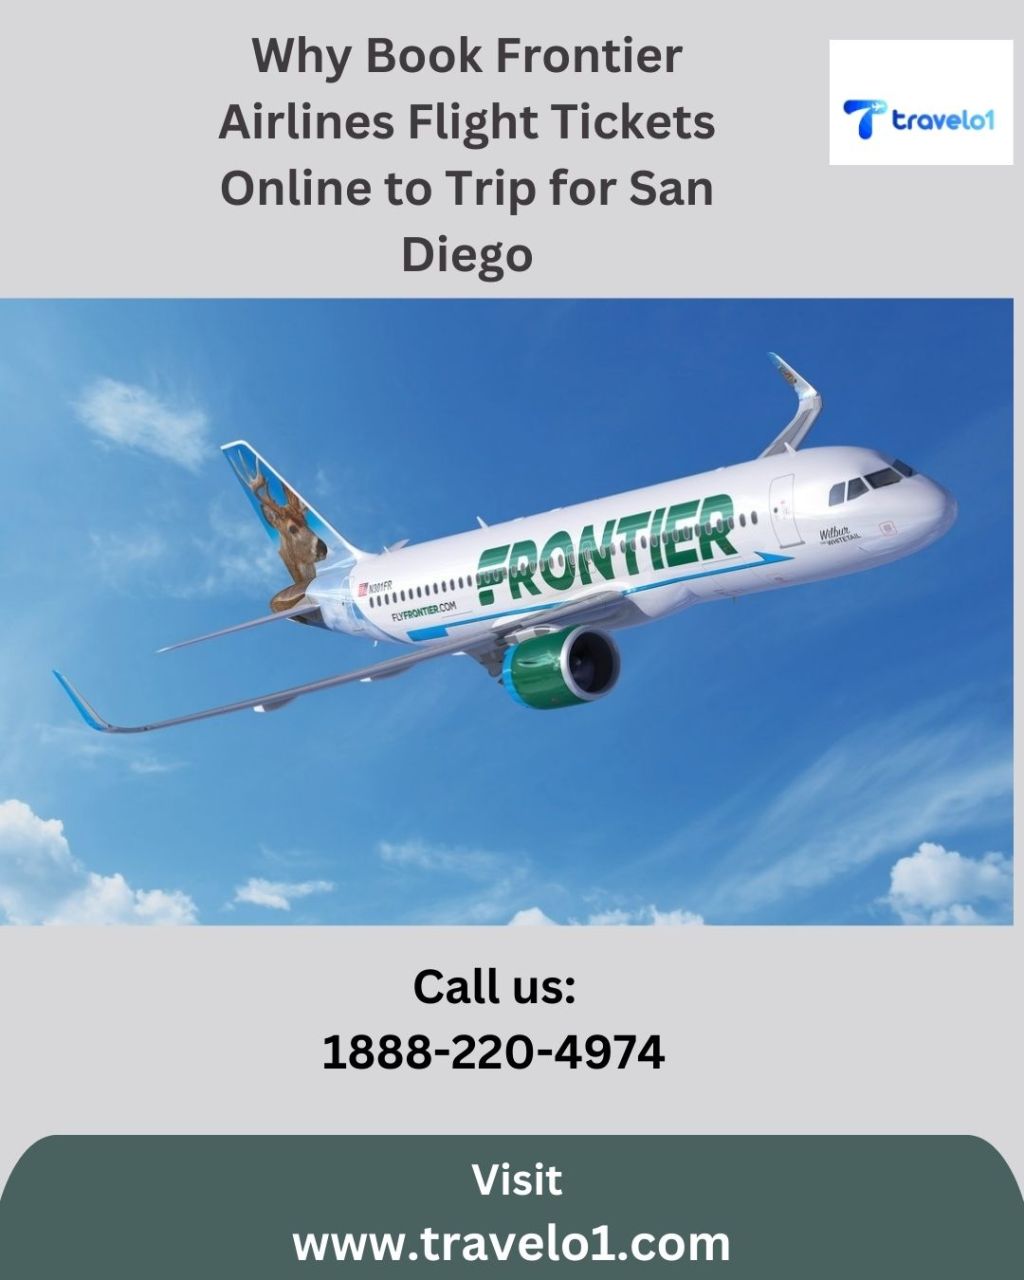 Why Book Frontier Airlines Flight Tickets Online to Trip for San Diego